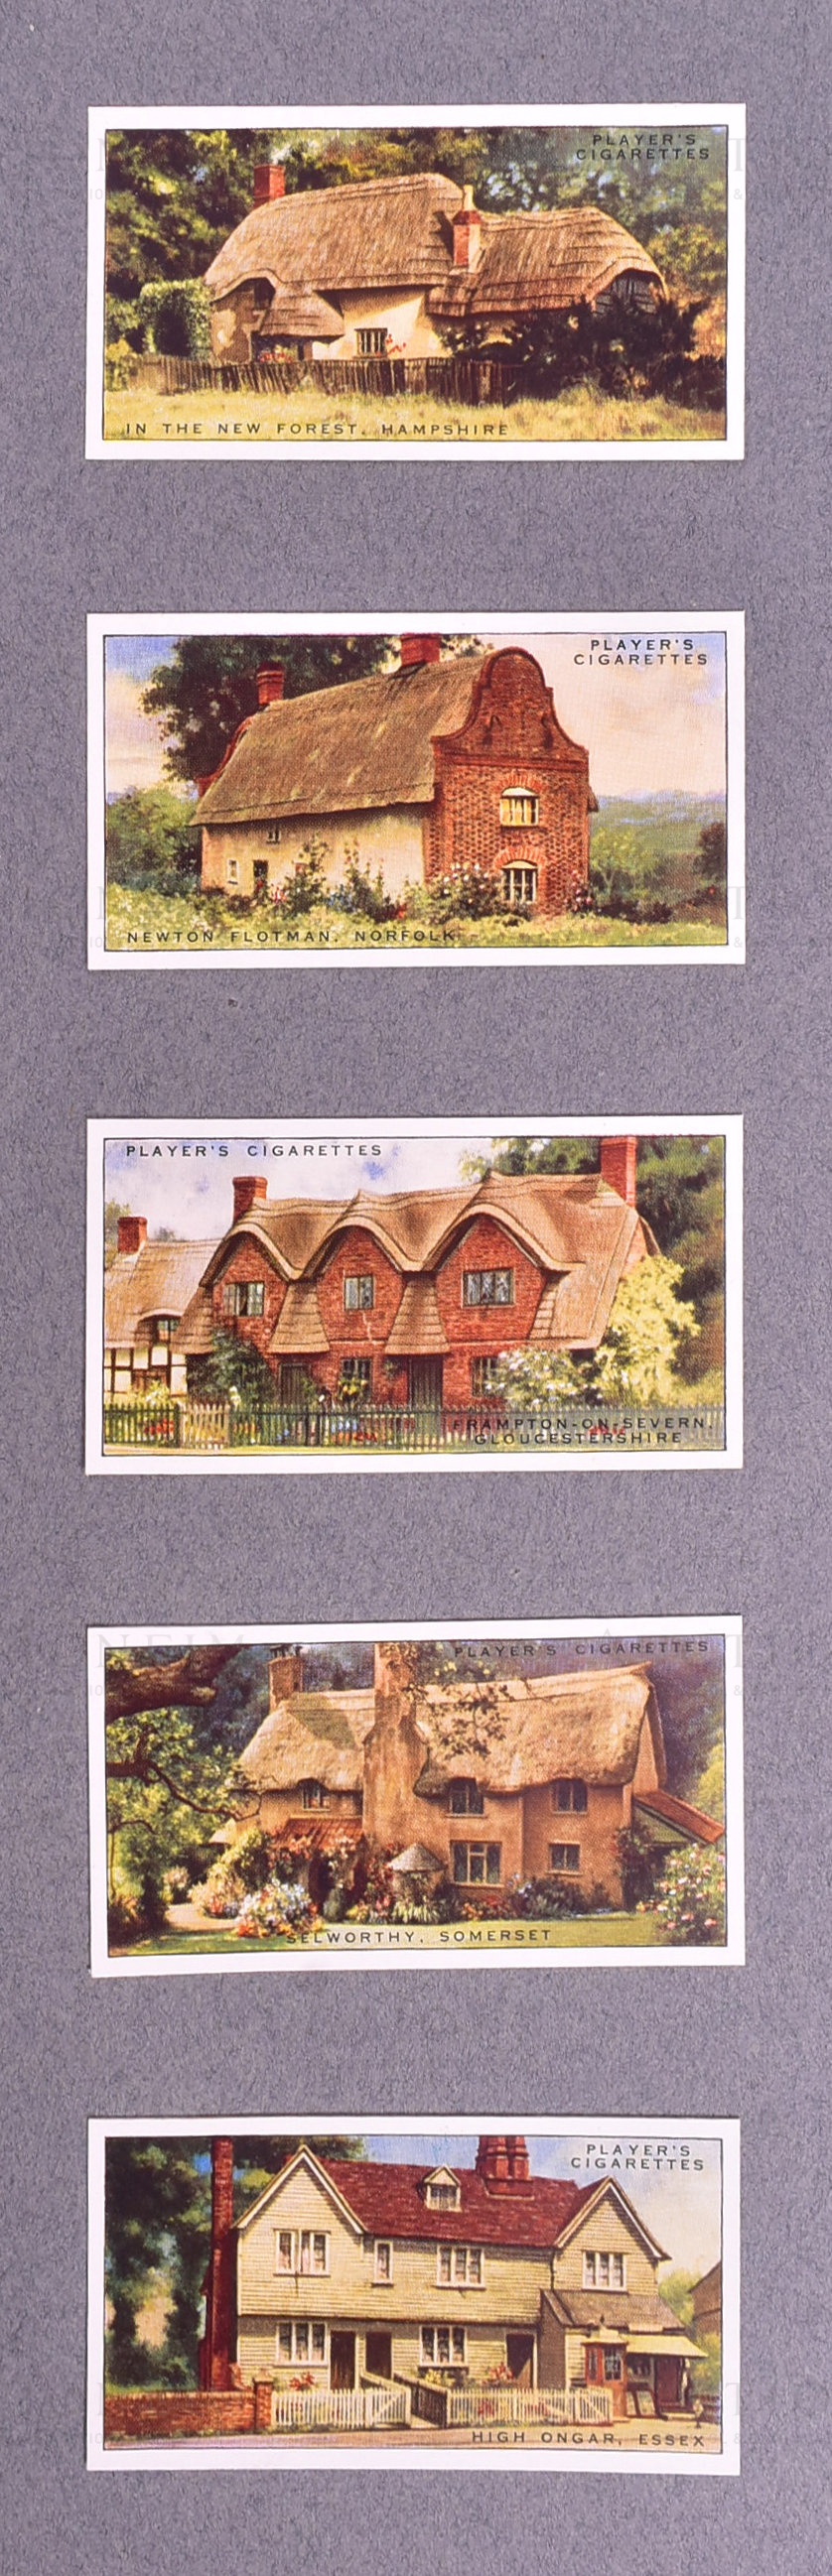 PLAYER'S - COTTAGE ARCHITECTURE (1946) - ORIGINAL PRINTER PROOFS - Image 4 of 7